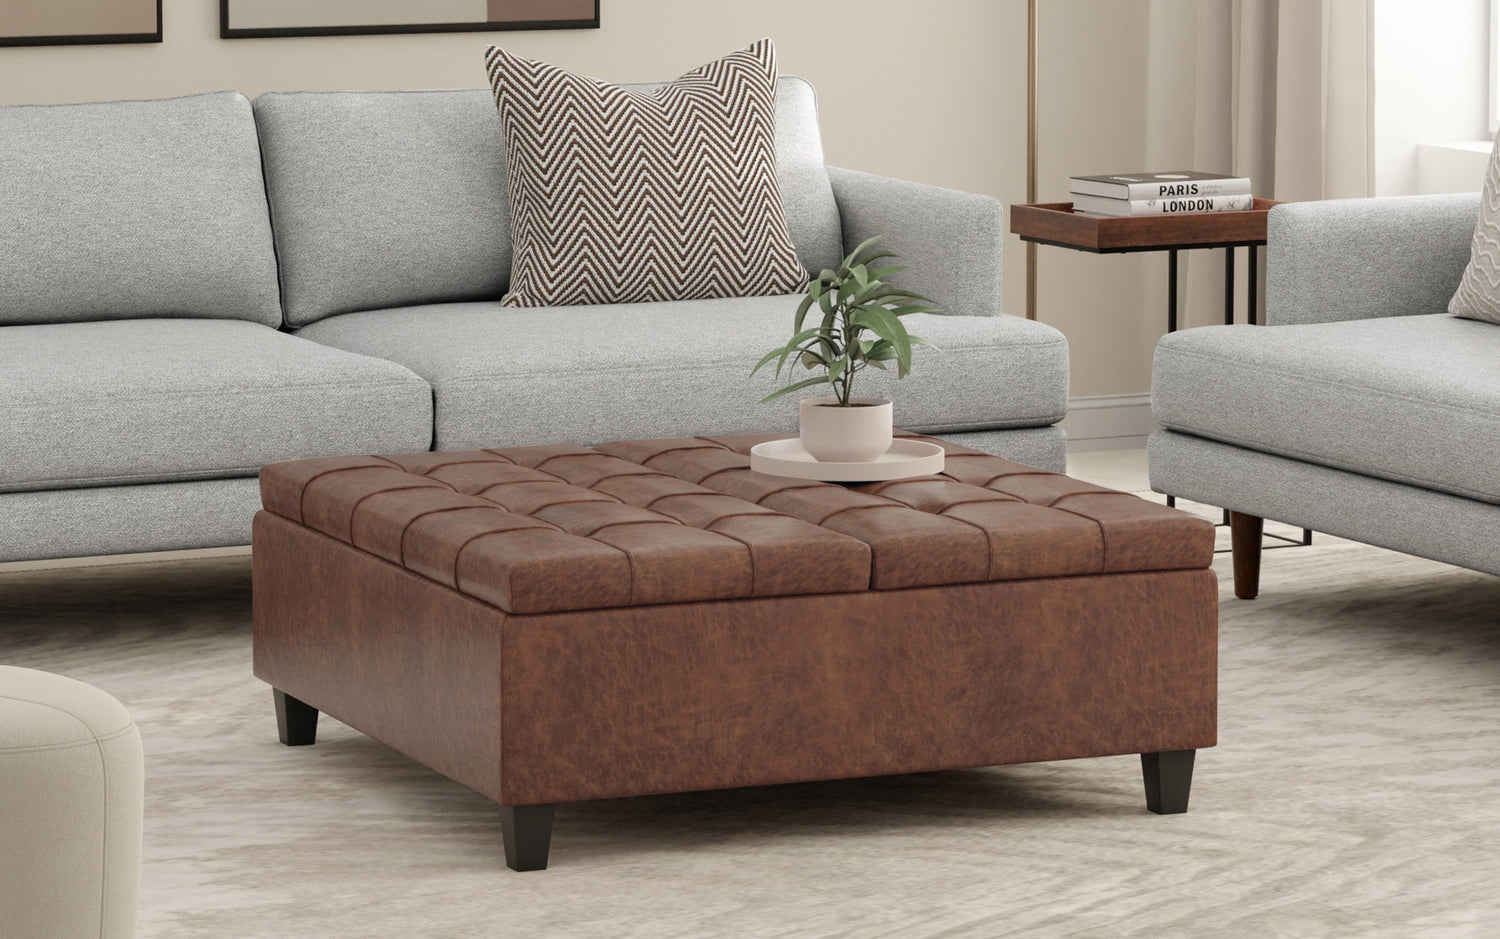 Distressed Saddle Brown Distressed Vegan Leather | Harrison Large Square Coffee Table Storage Ottoman